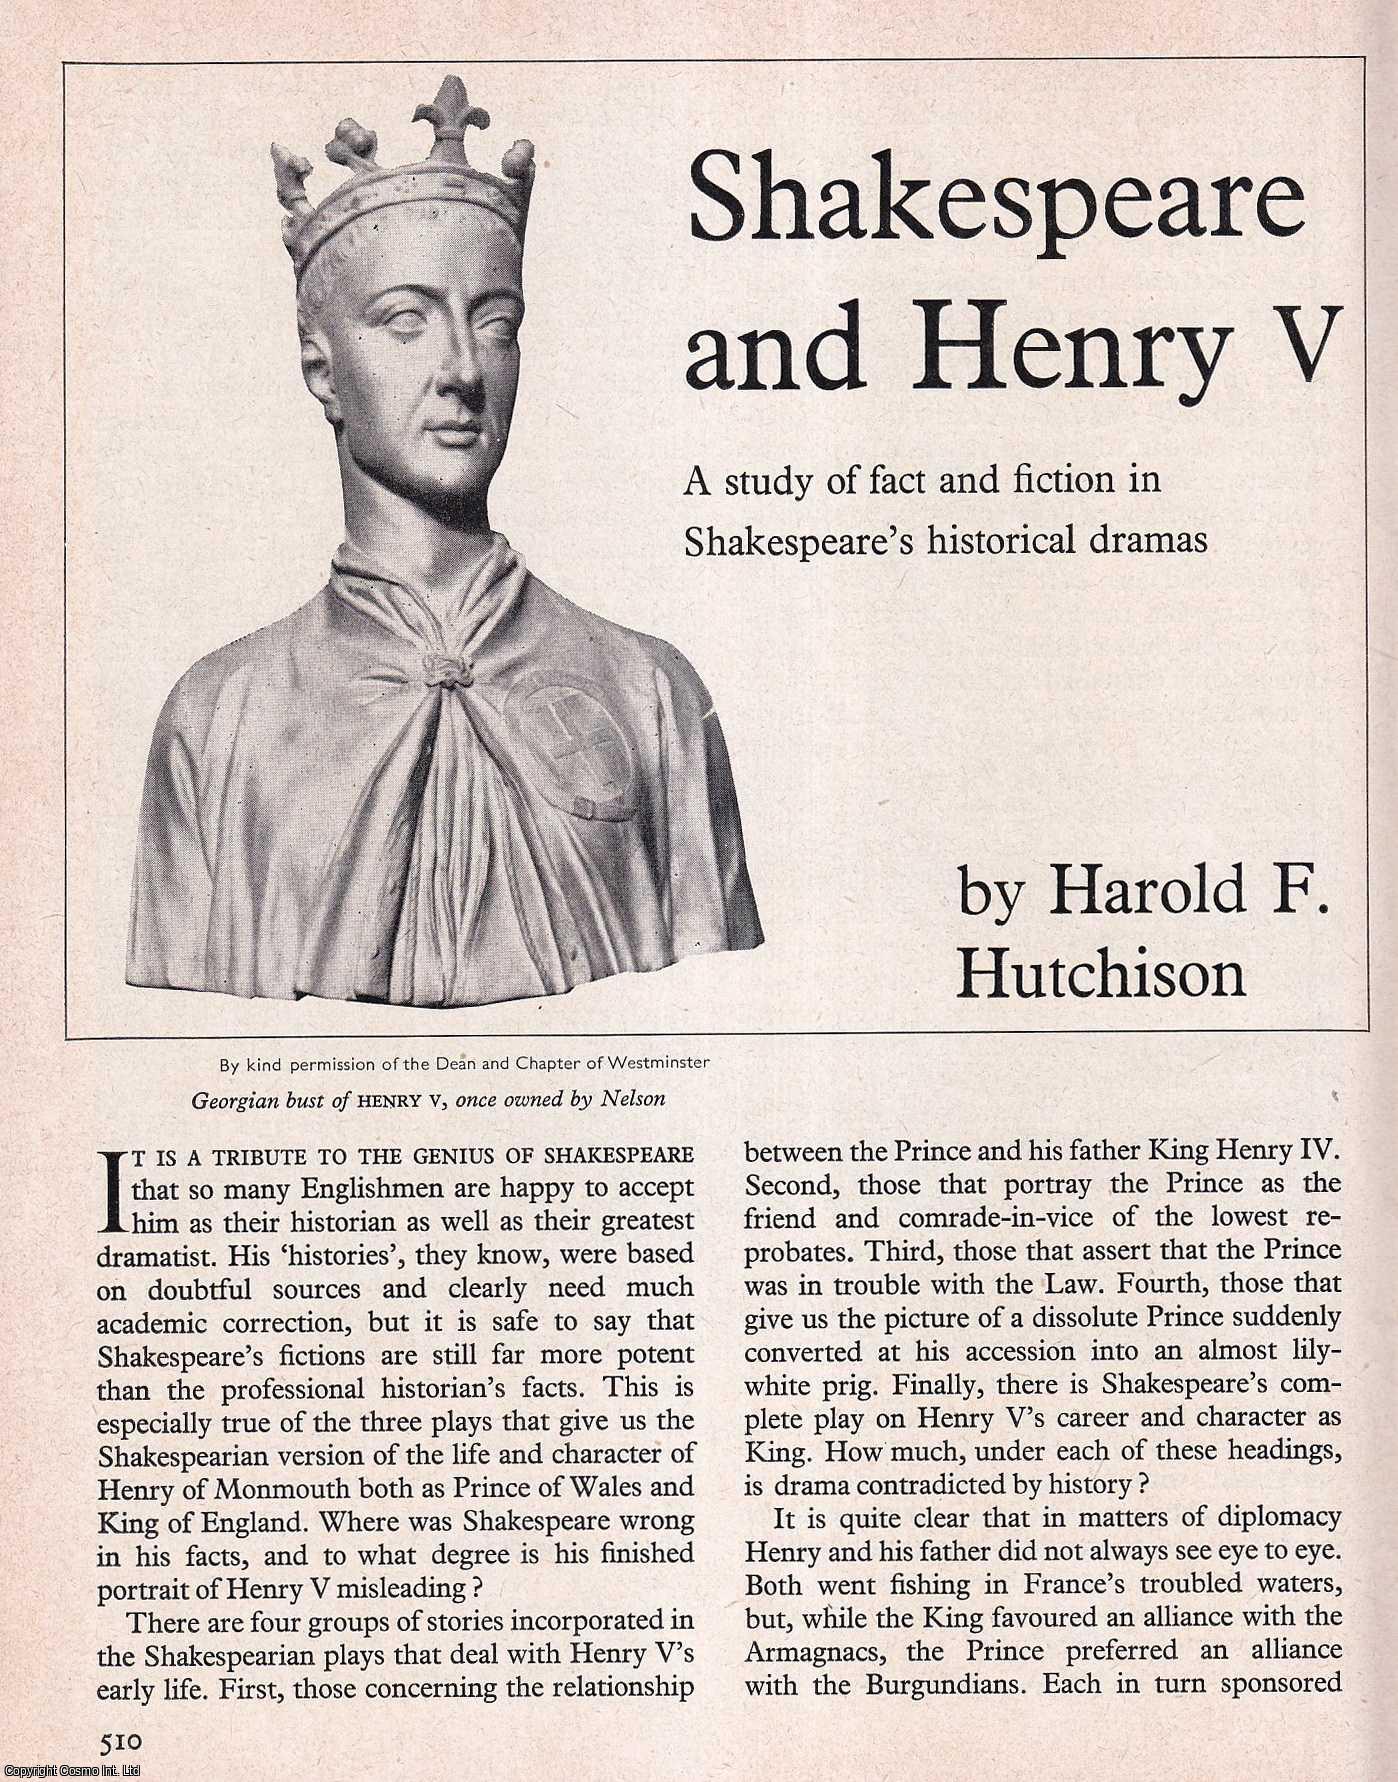 Harold F. Hutchison - Shakespeare and Henry V. An original article from History Today magazine, 1967.